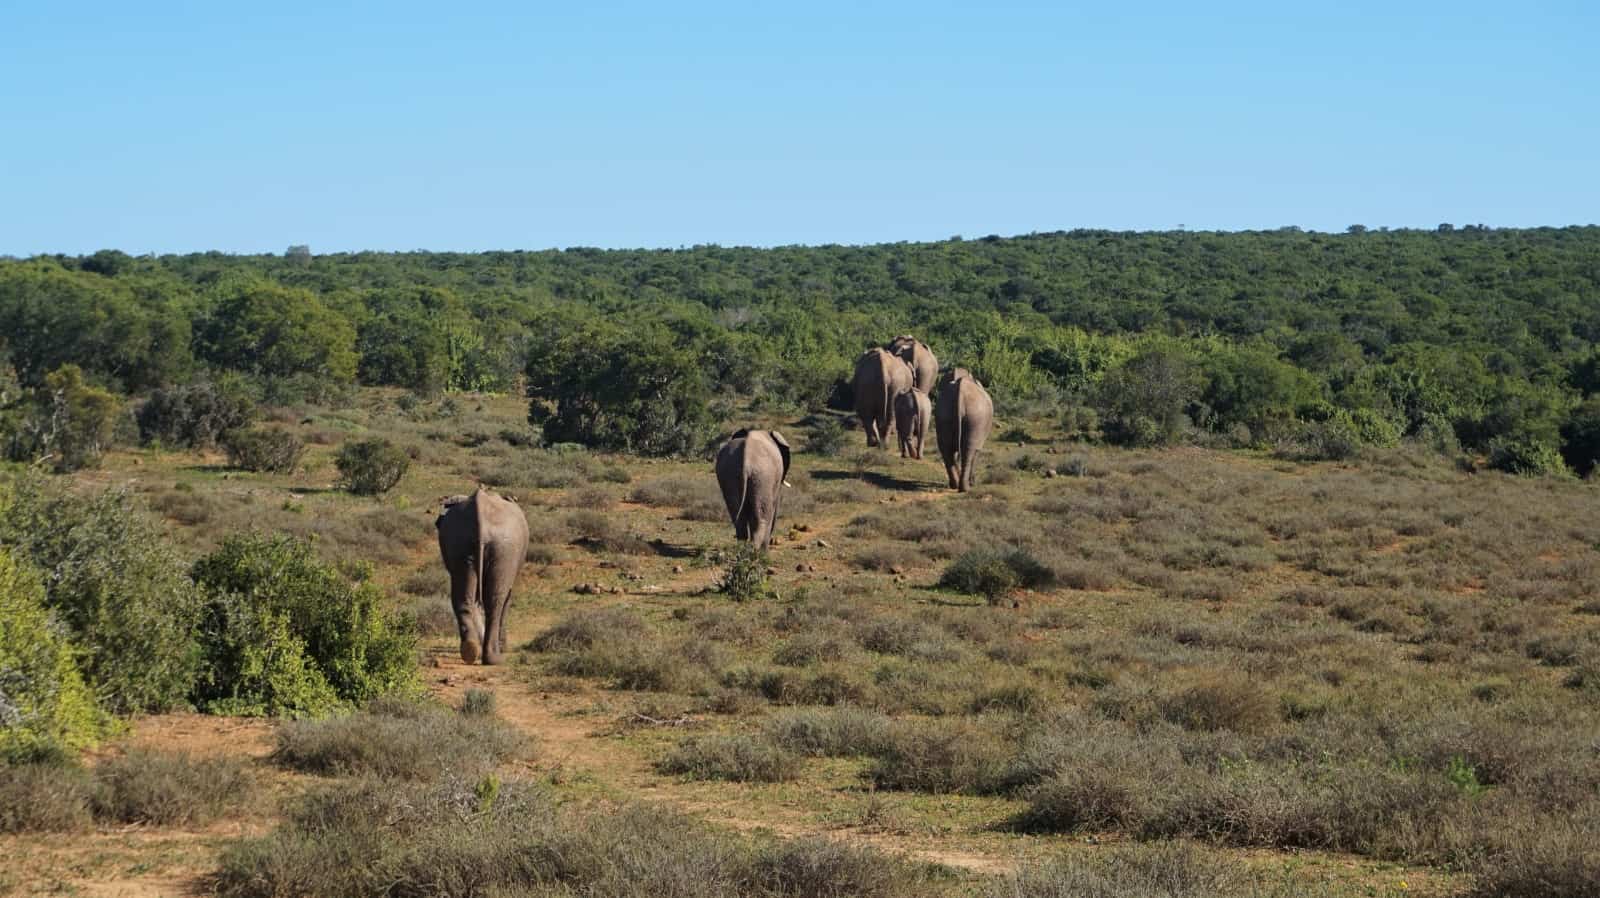 African elephants walking into the bush in Addo Elephant National Park, South Africa